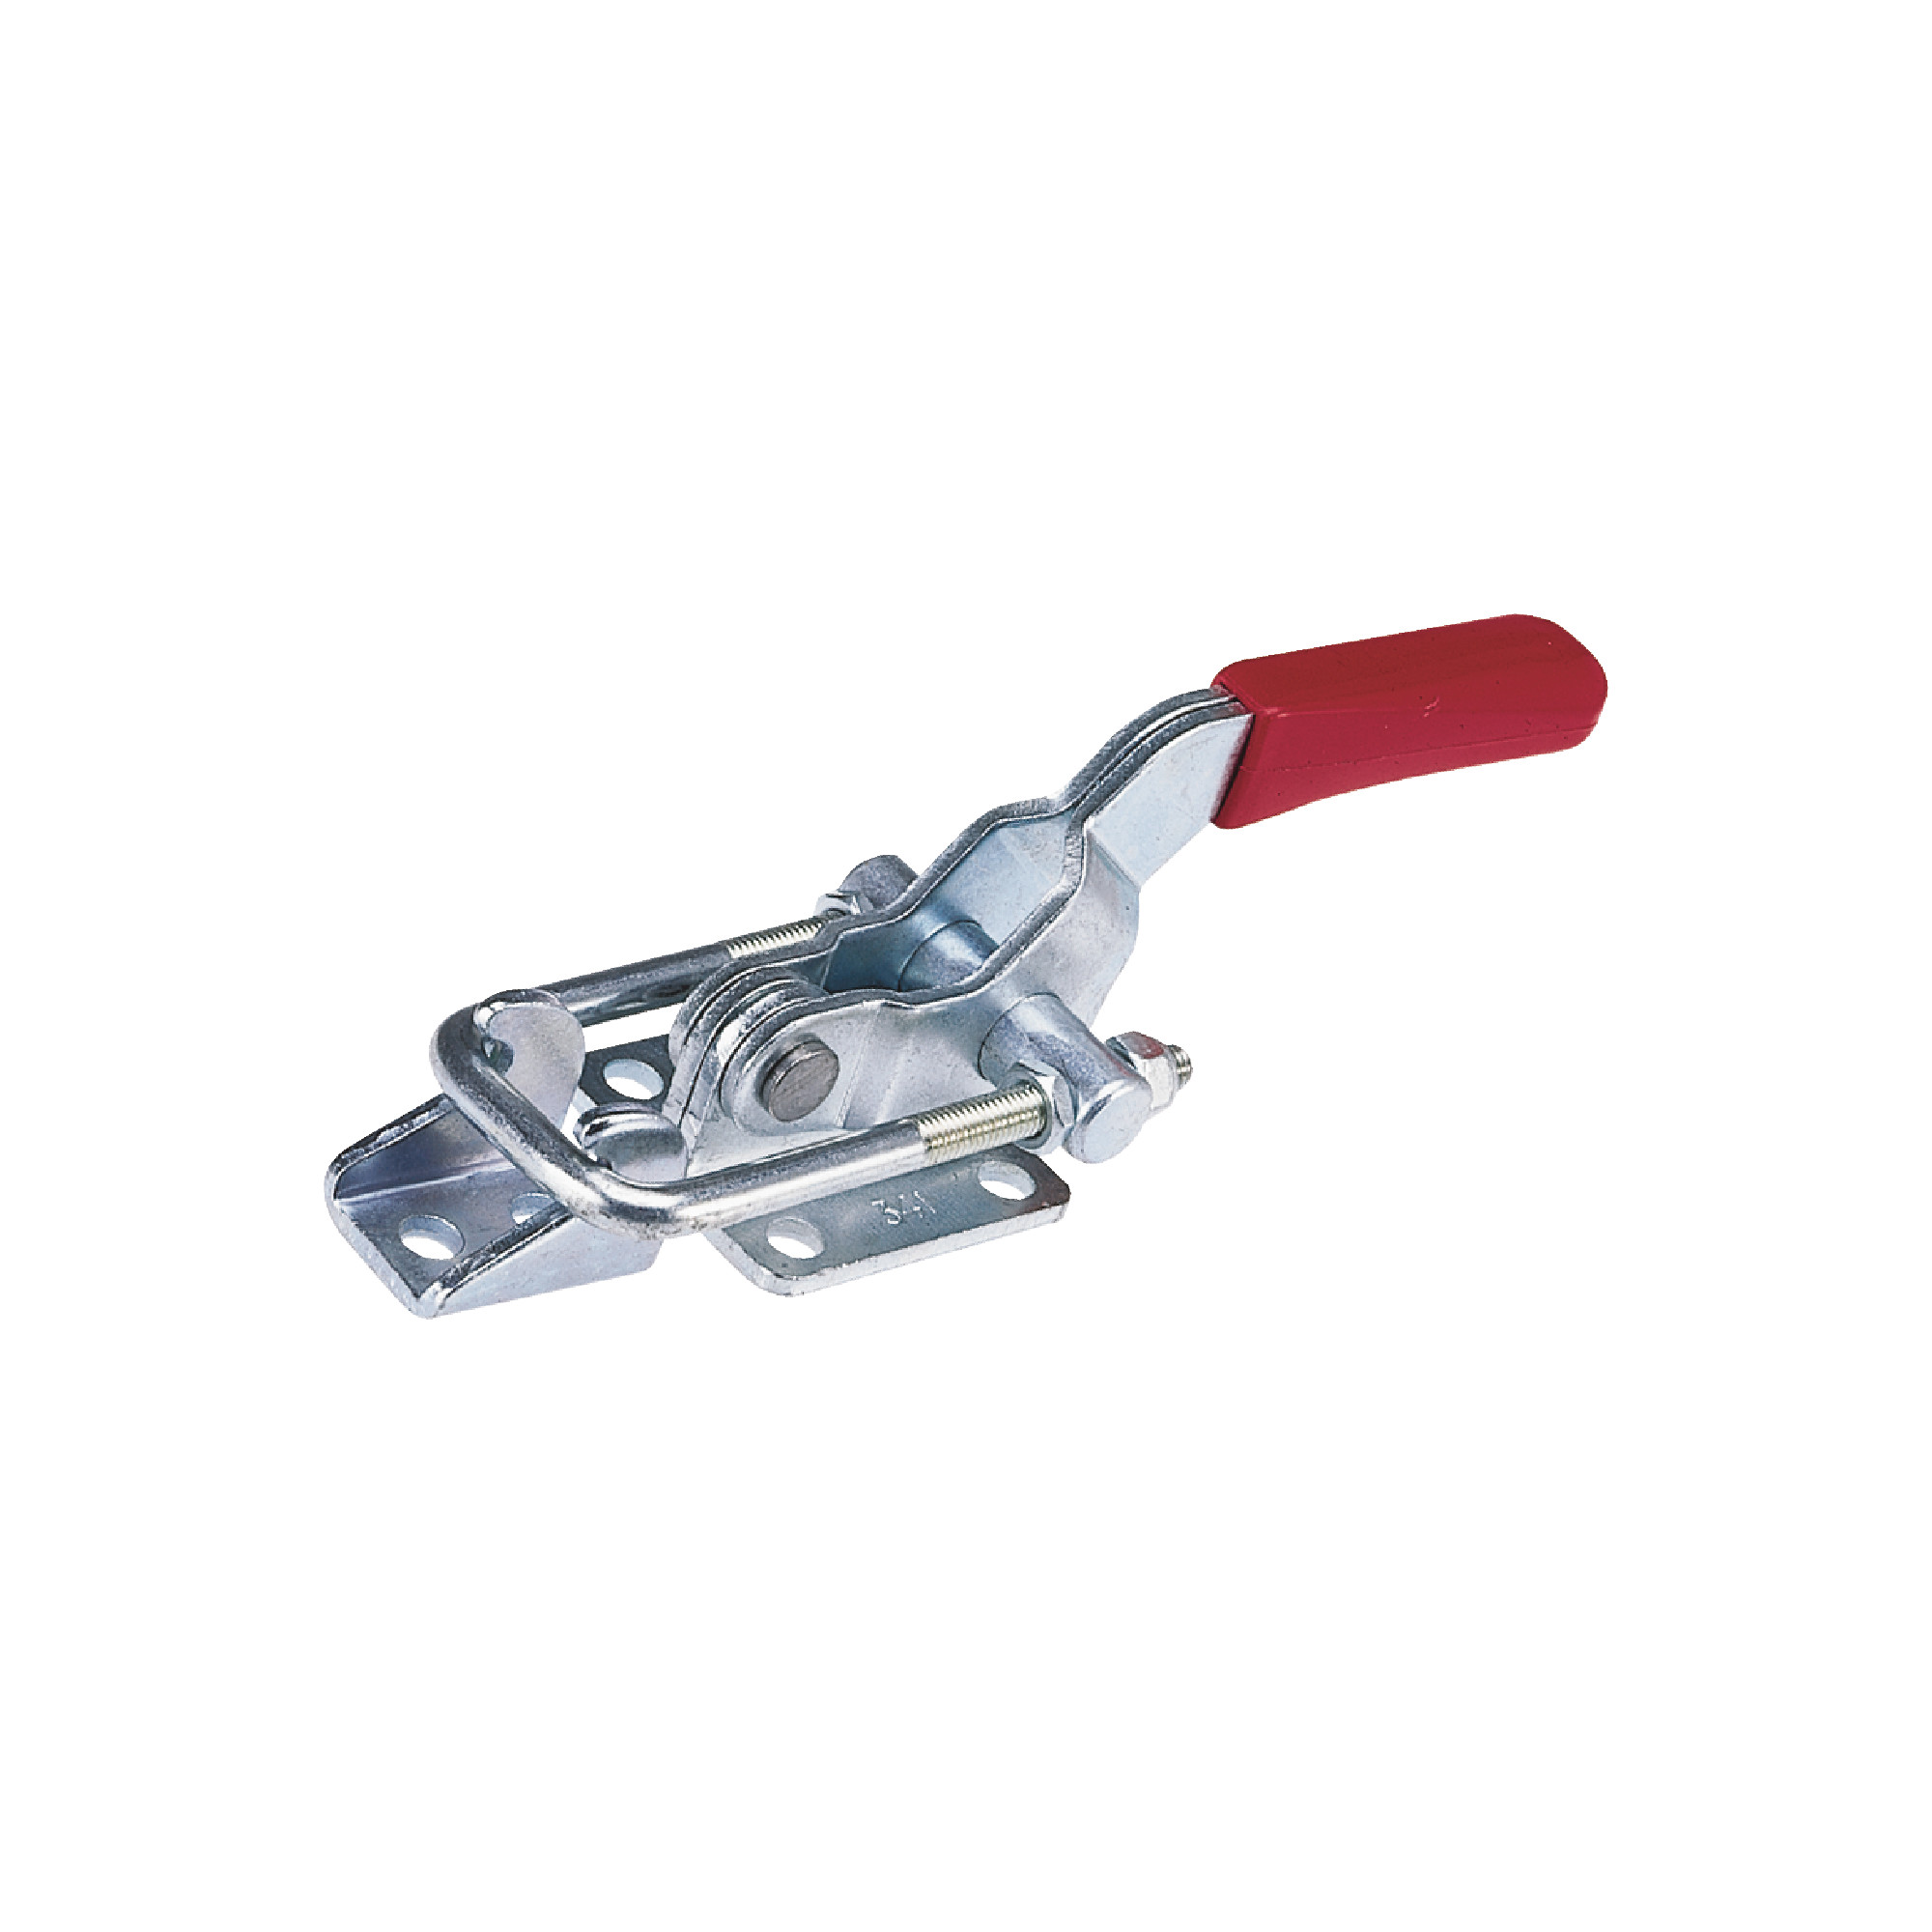 Pull Action Latch Type Toggle Clamp